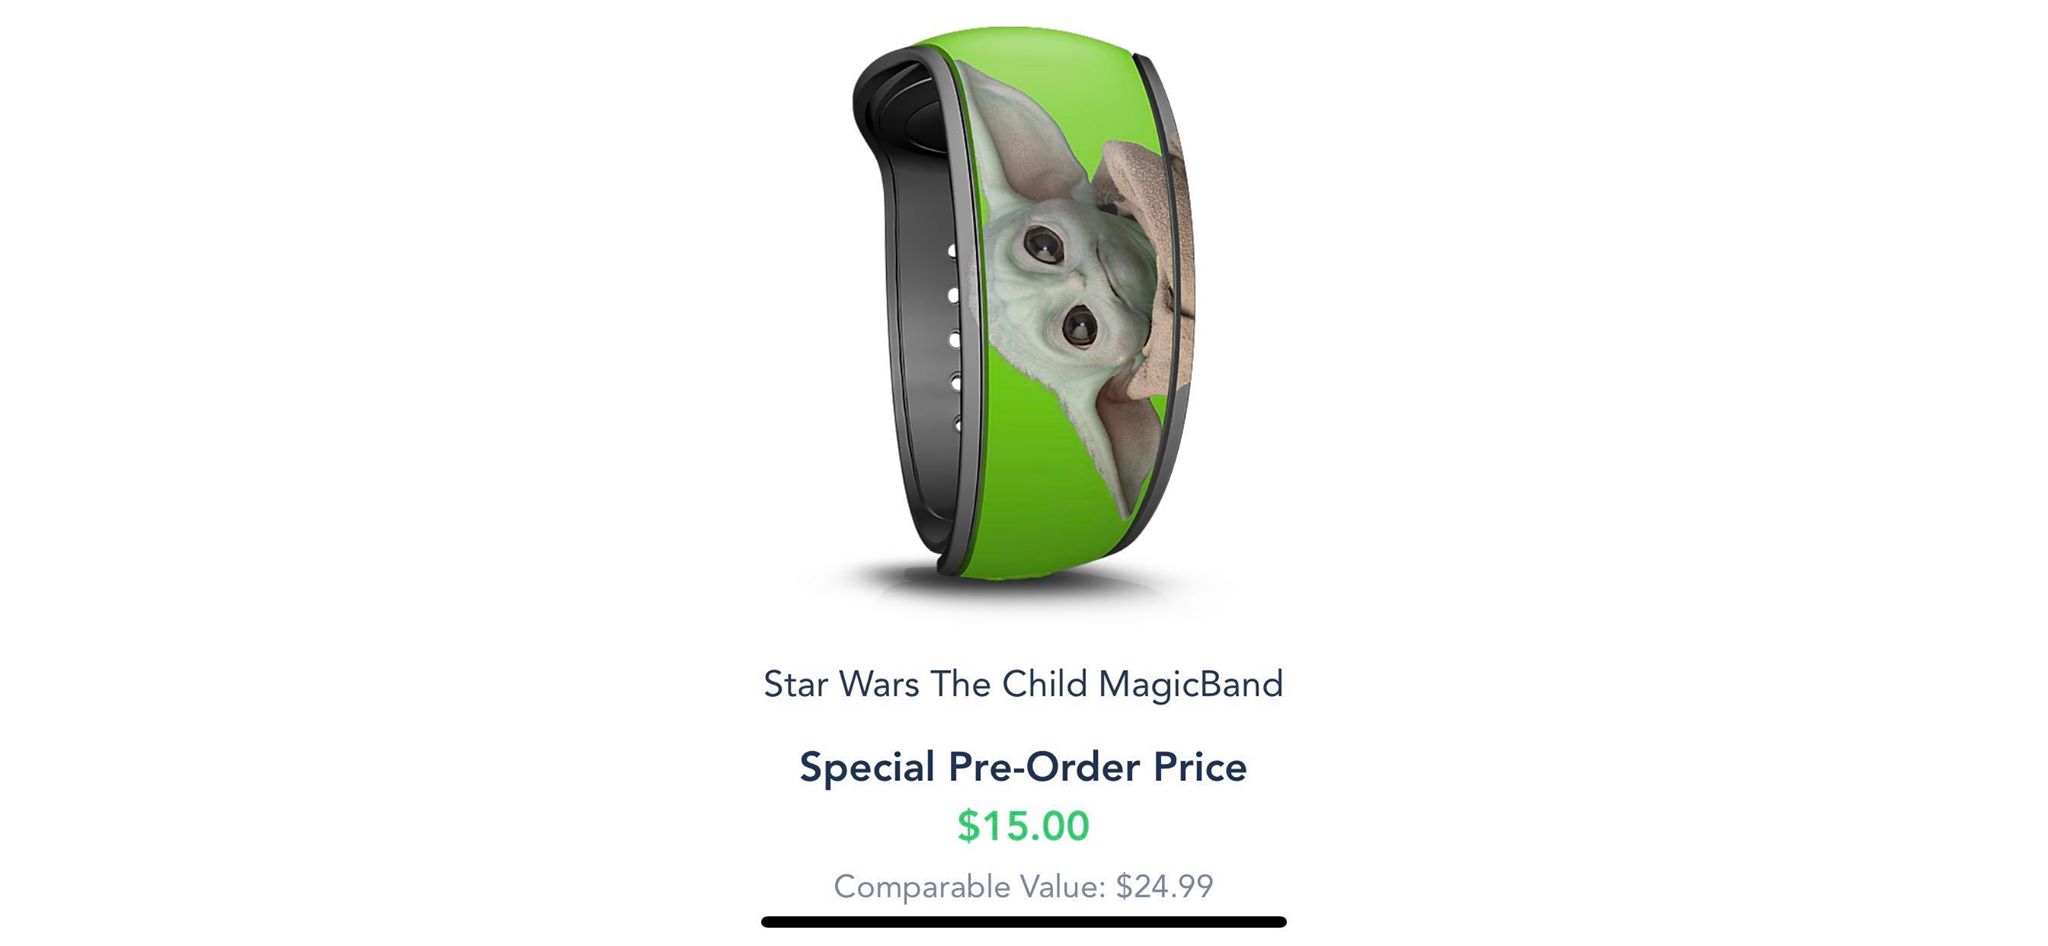 Baby Yoda Magicband now available for preorder on the Disney World website